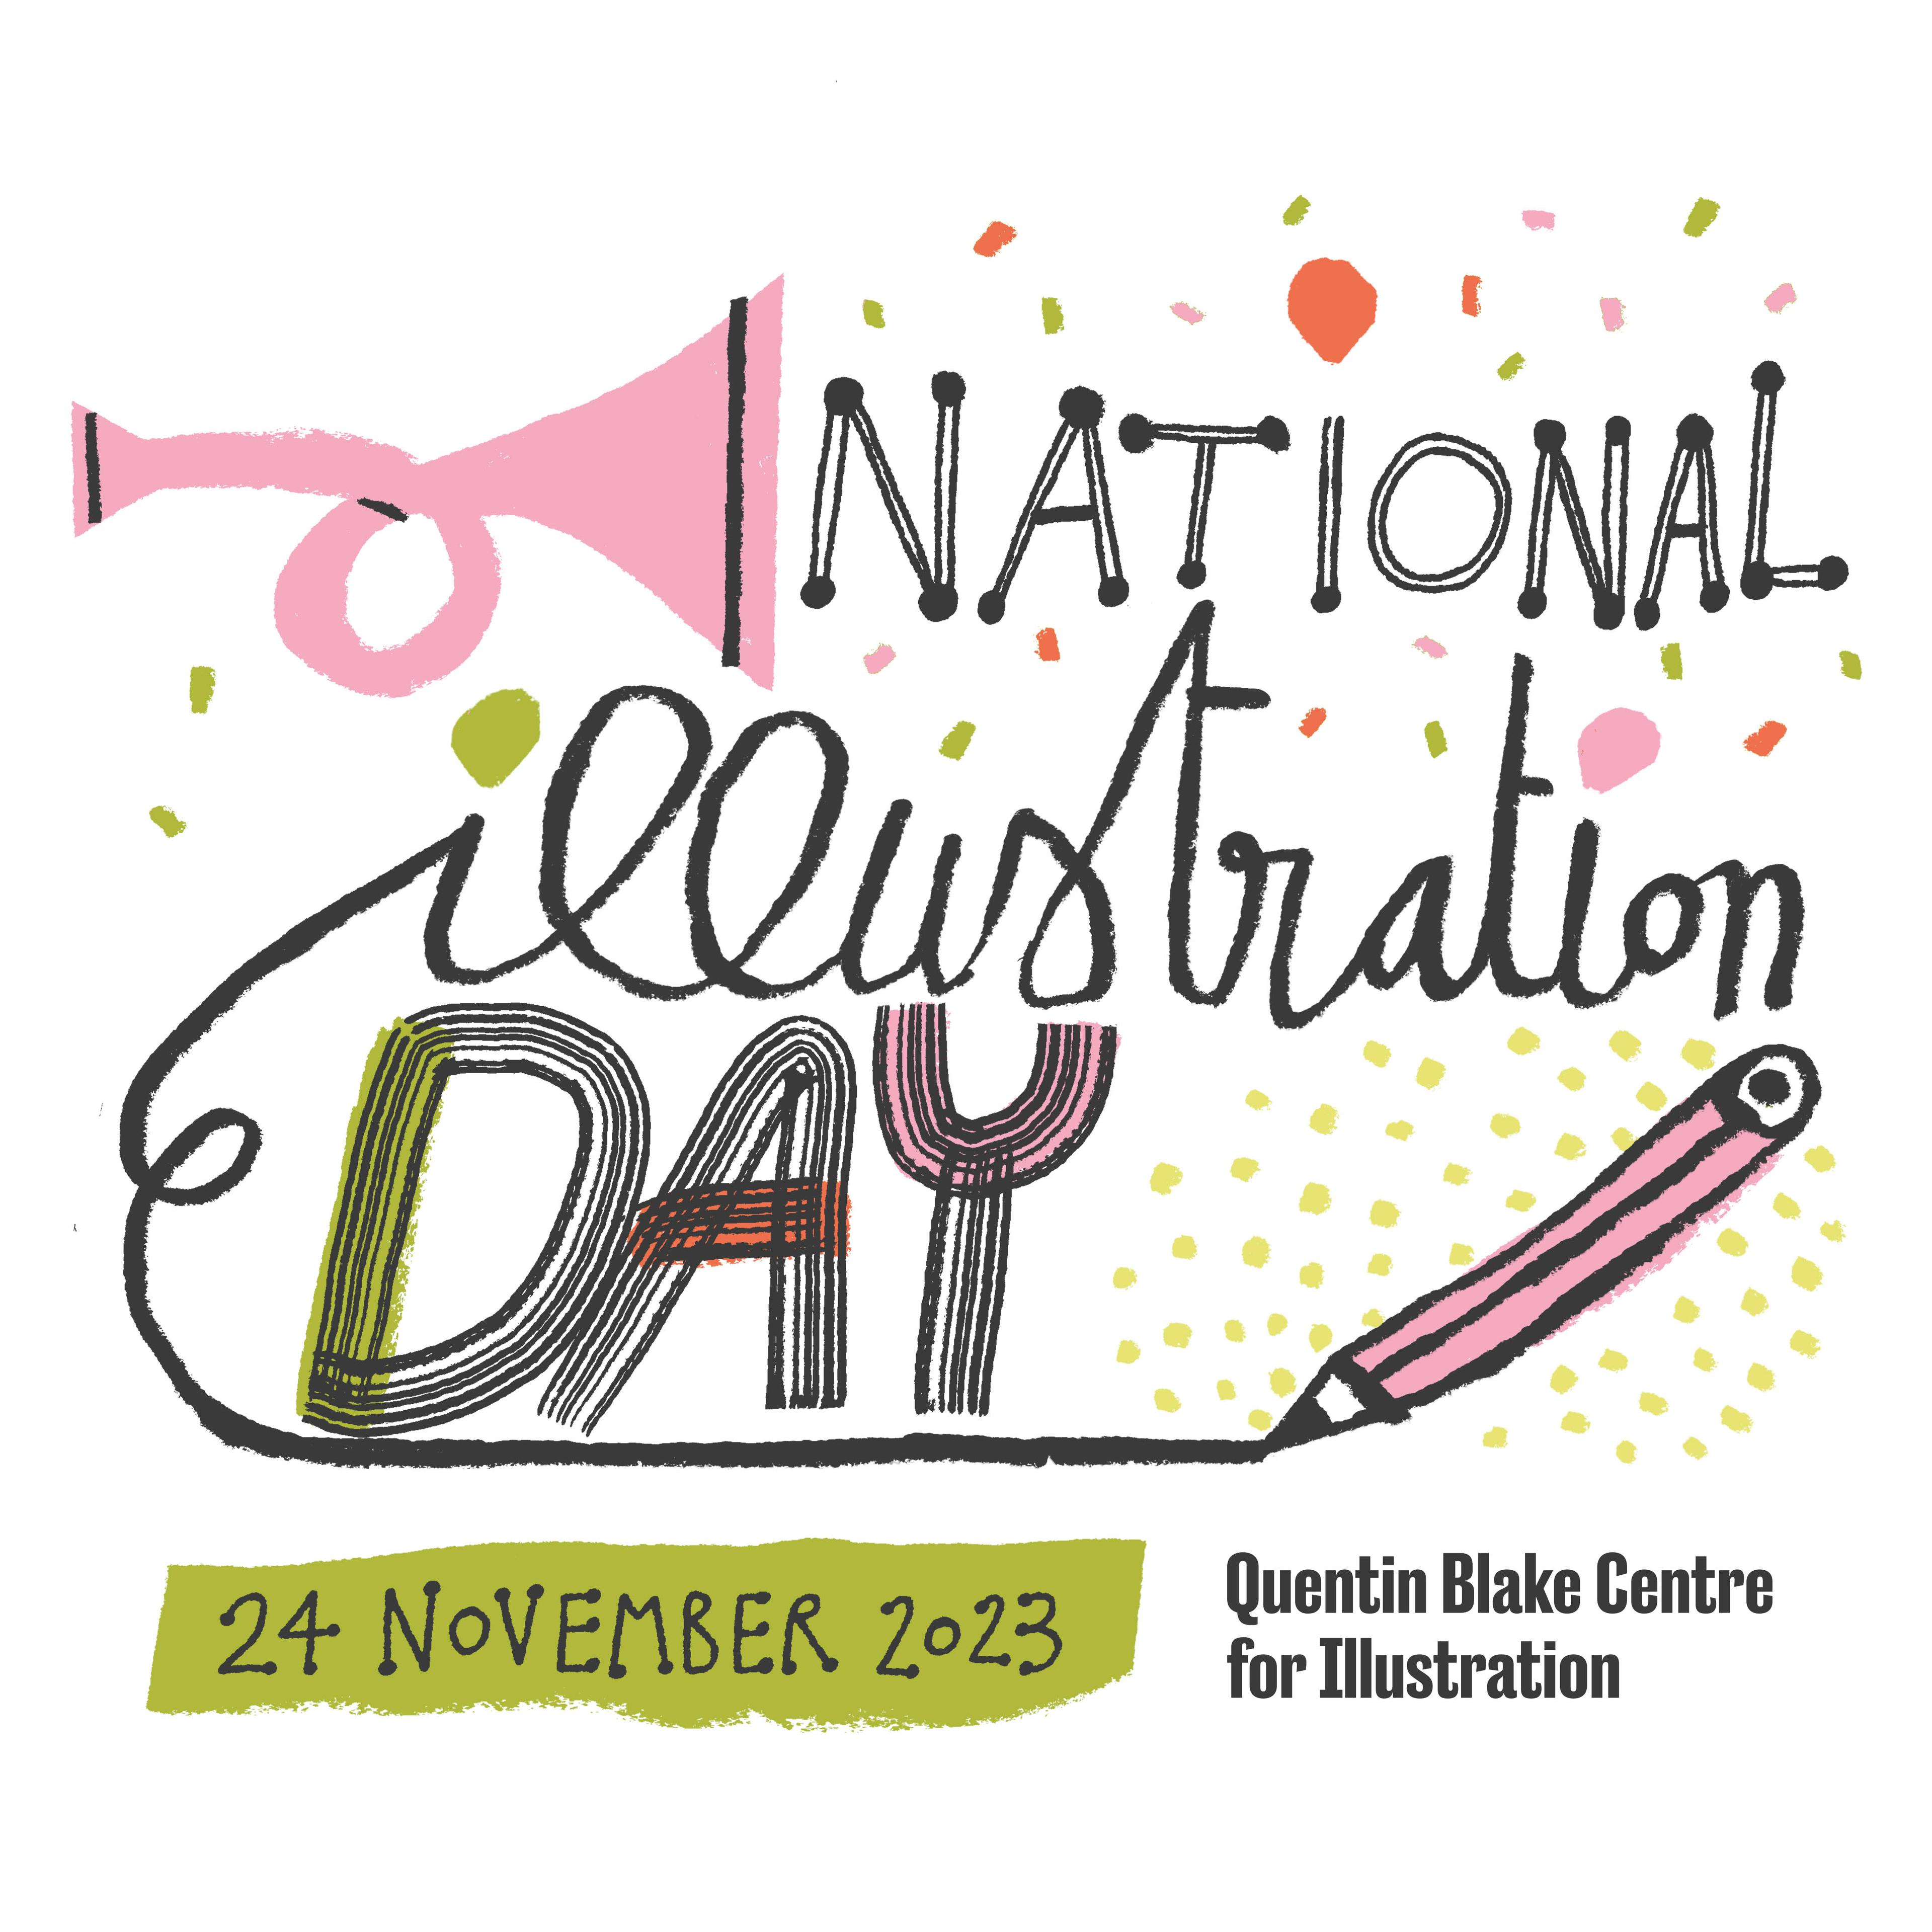 National Illustration Day logo on a white background with colourful confetti, a horn and a pencil.